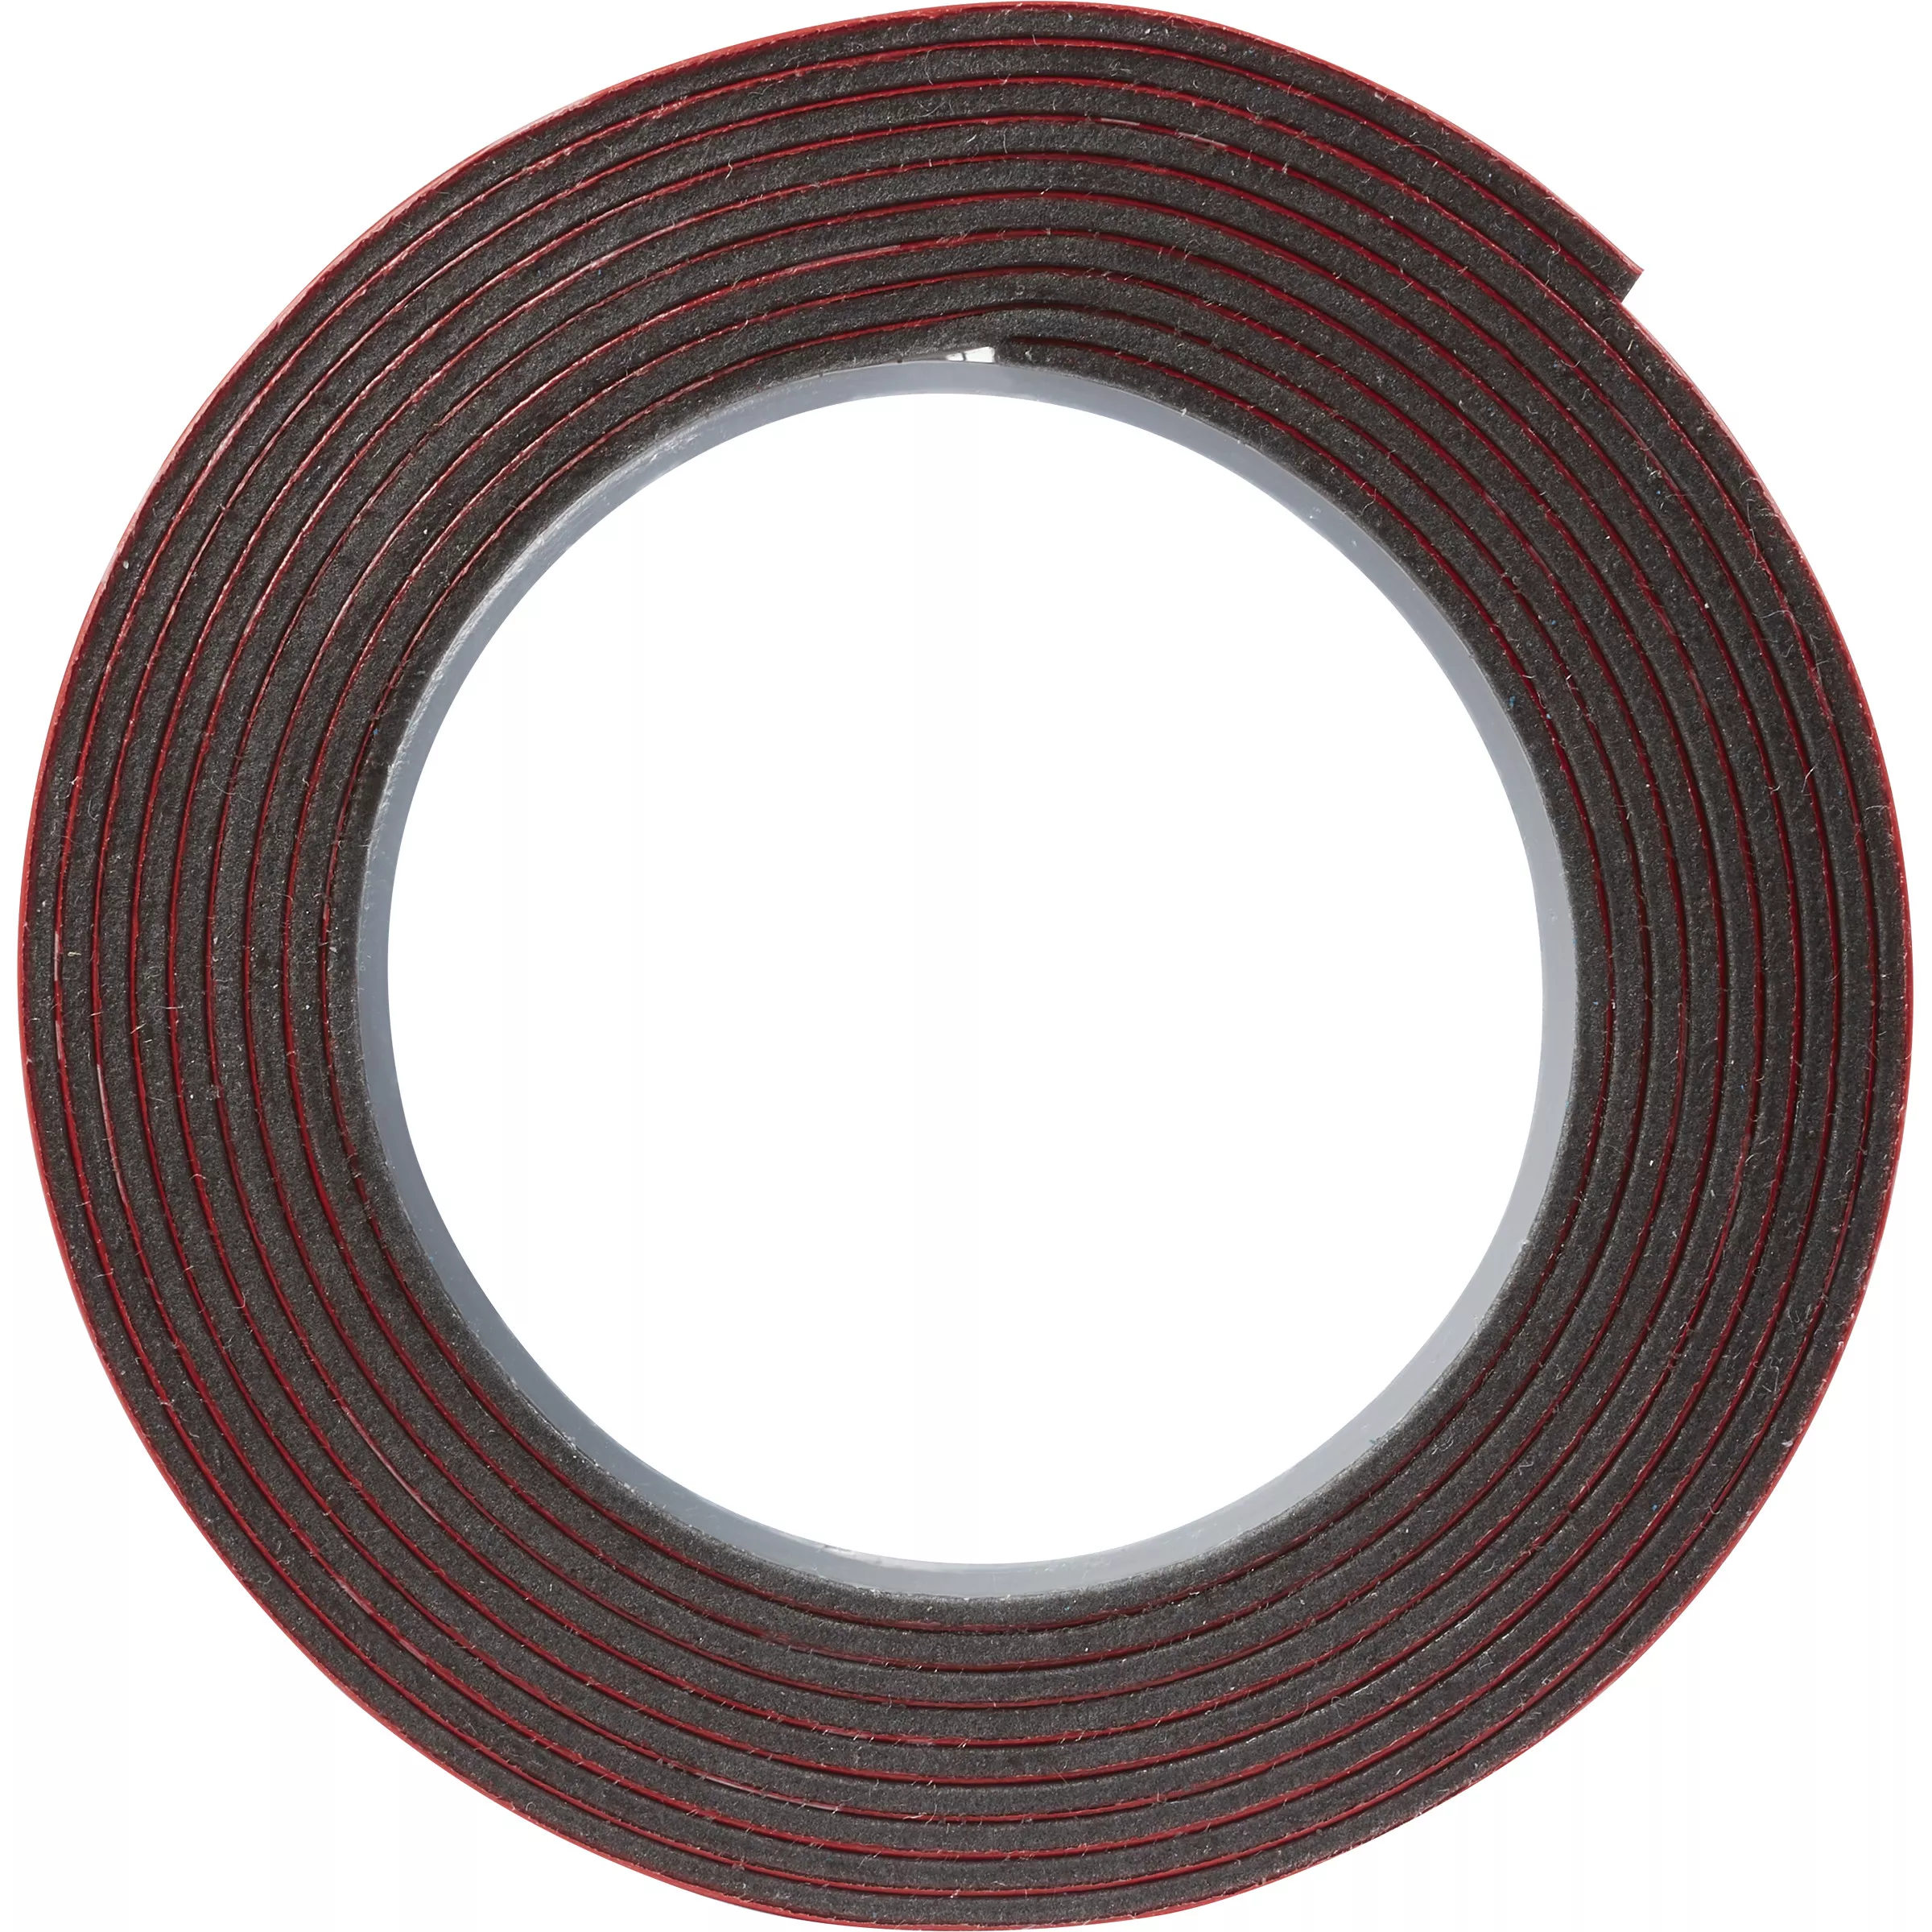 Product Number 03615 | 3M™ Super Strength Molding Tape